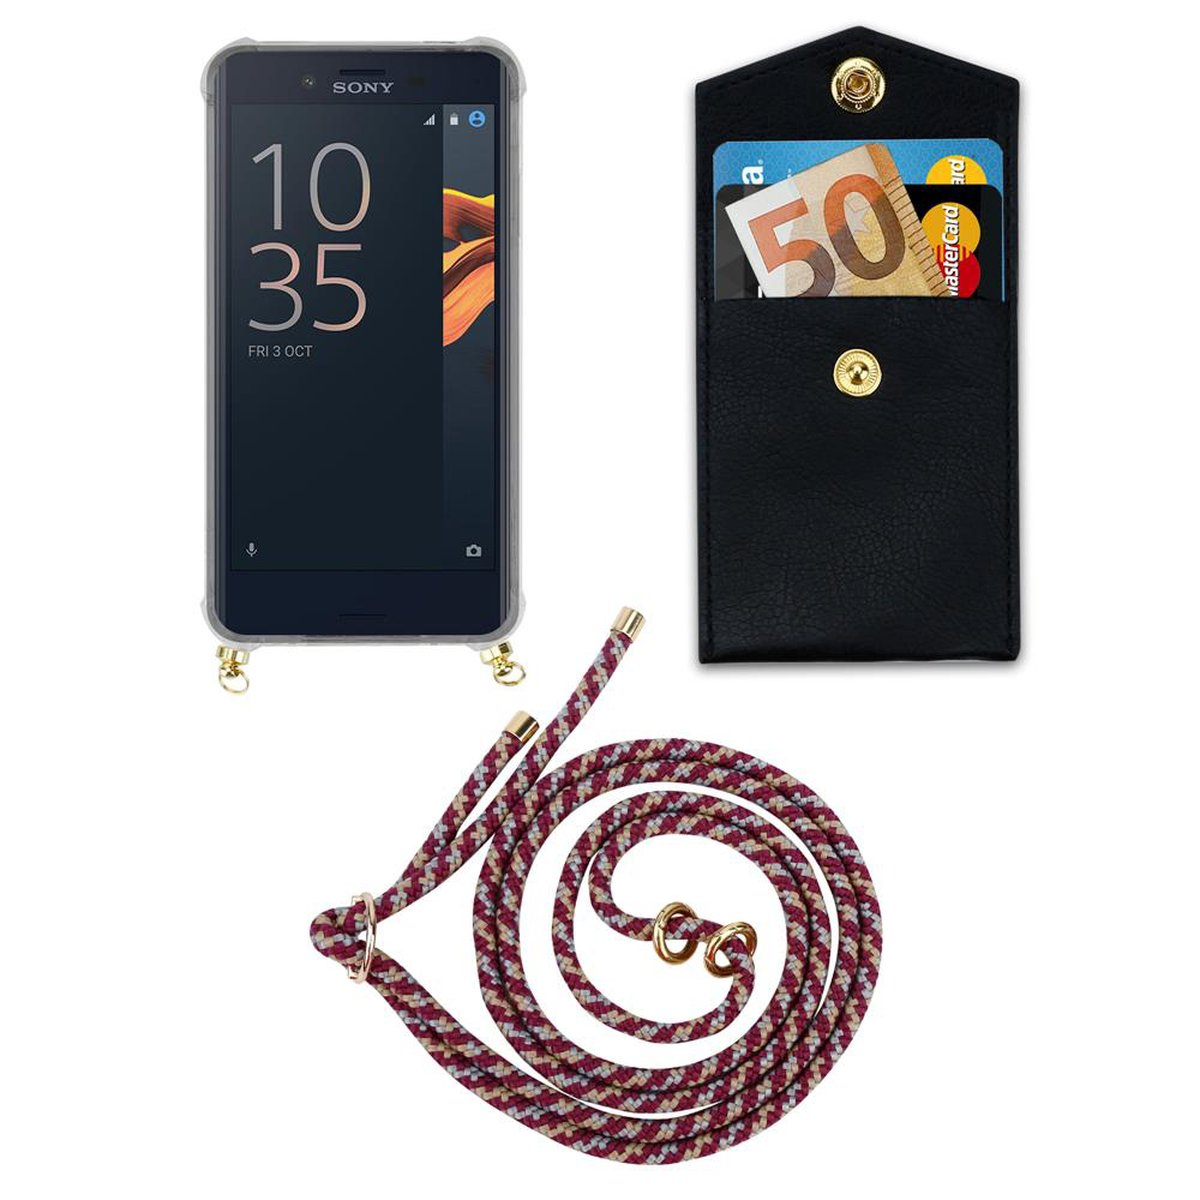 CADORABO Handy Backcover, GELB Ringen, und abnehmbarer ROT mit Band Gold Xperia Kette X COMPACT, Sony, WEIß Kordel Hülle